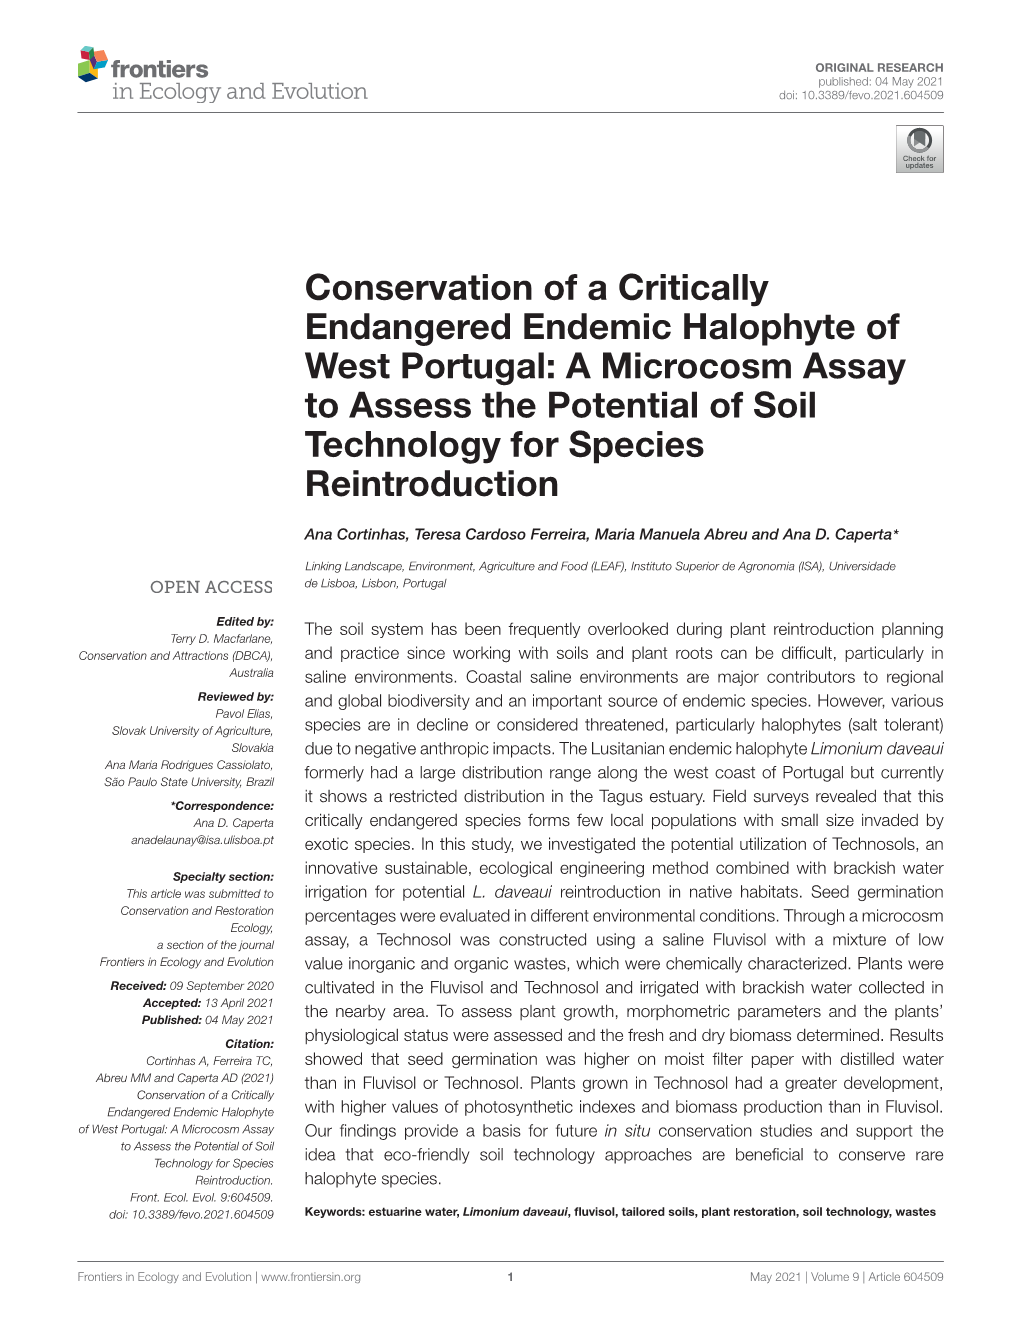 Conservation of a Critically Endangered Endemic Halophyte of West Portugal: a Microcosm Assay to Assess the Potential of Soil Technology for Species Reintroduction